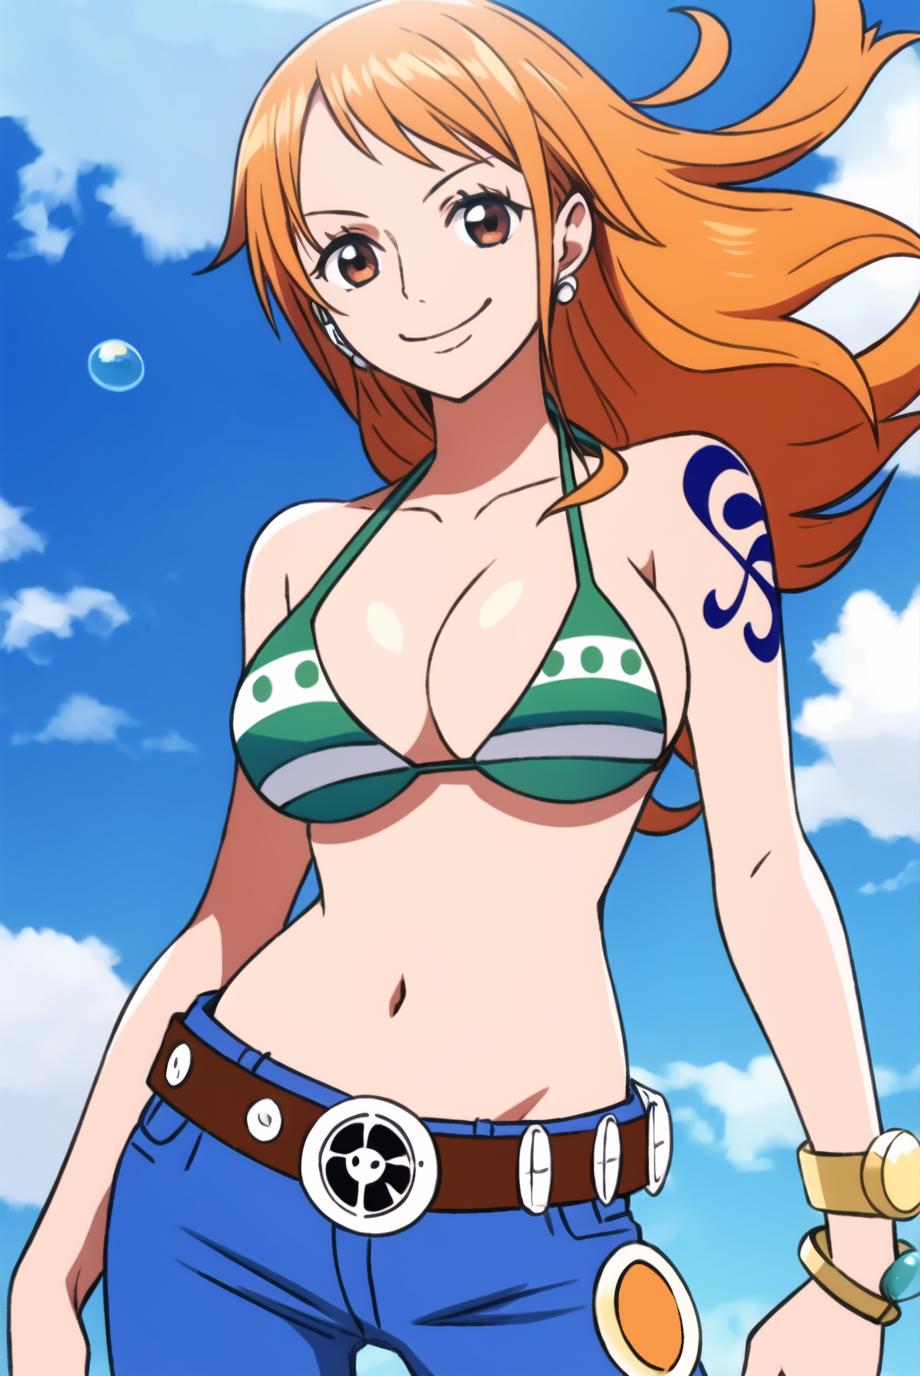 Anime girl with big breasts, wearing a green bikini and blue belt, posing for a picture.